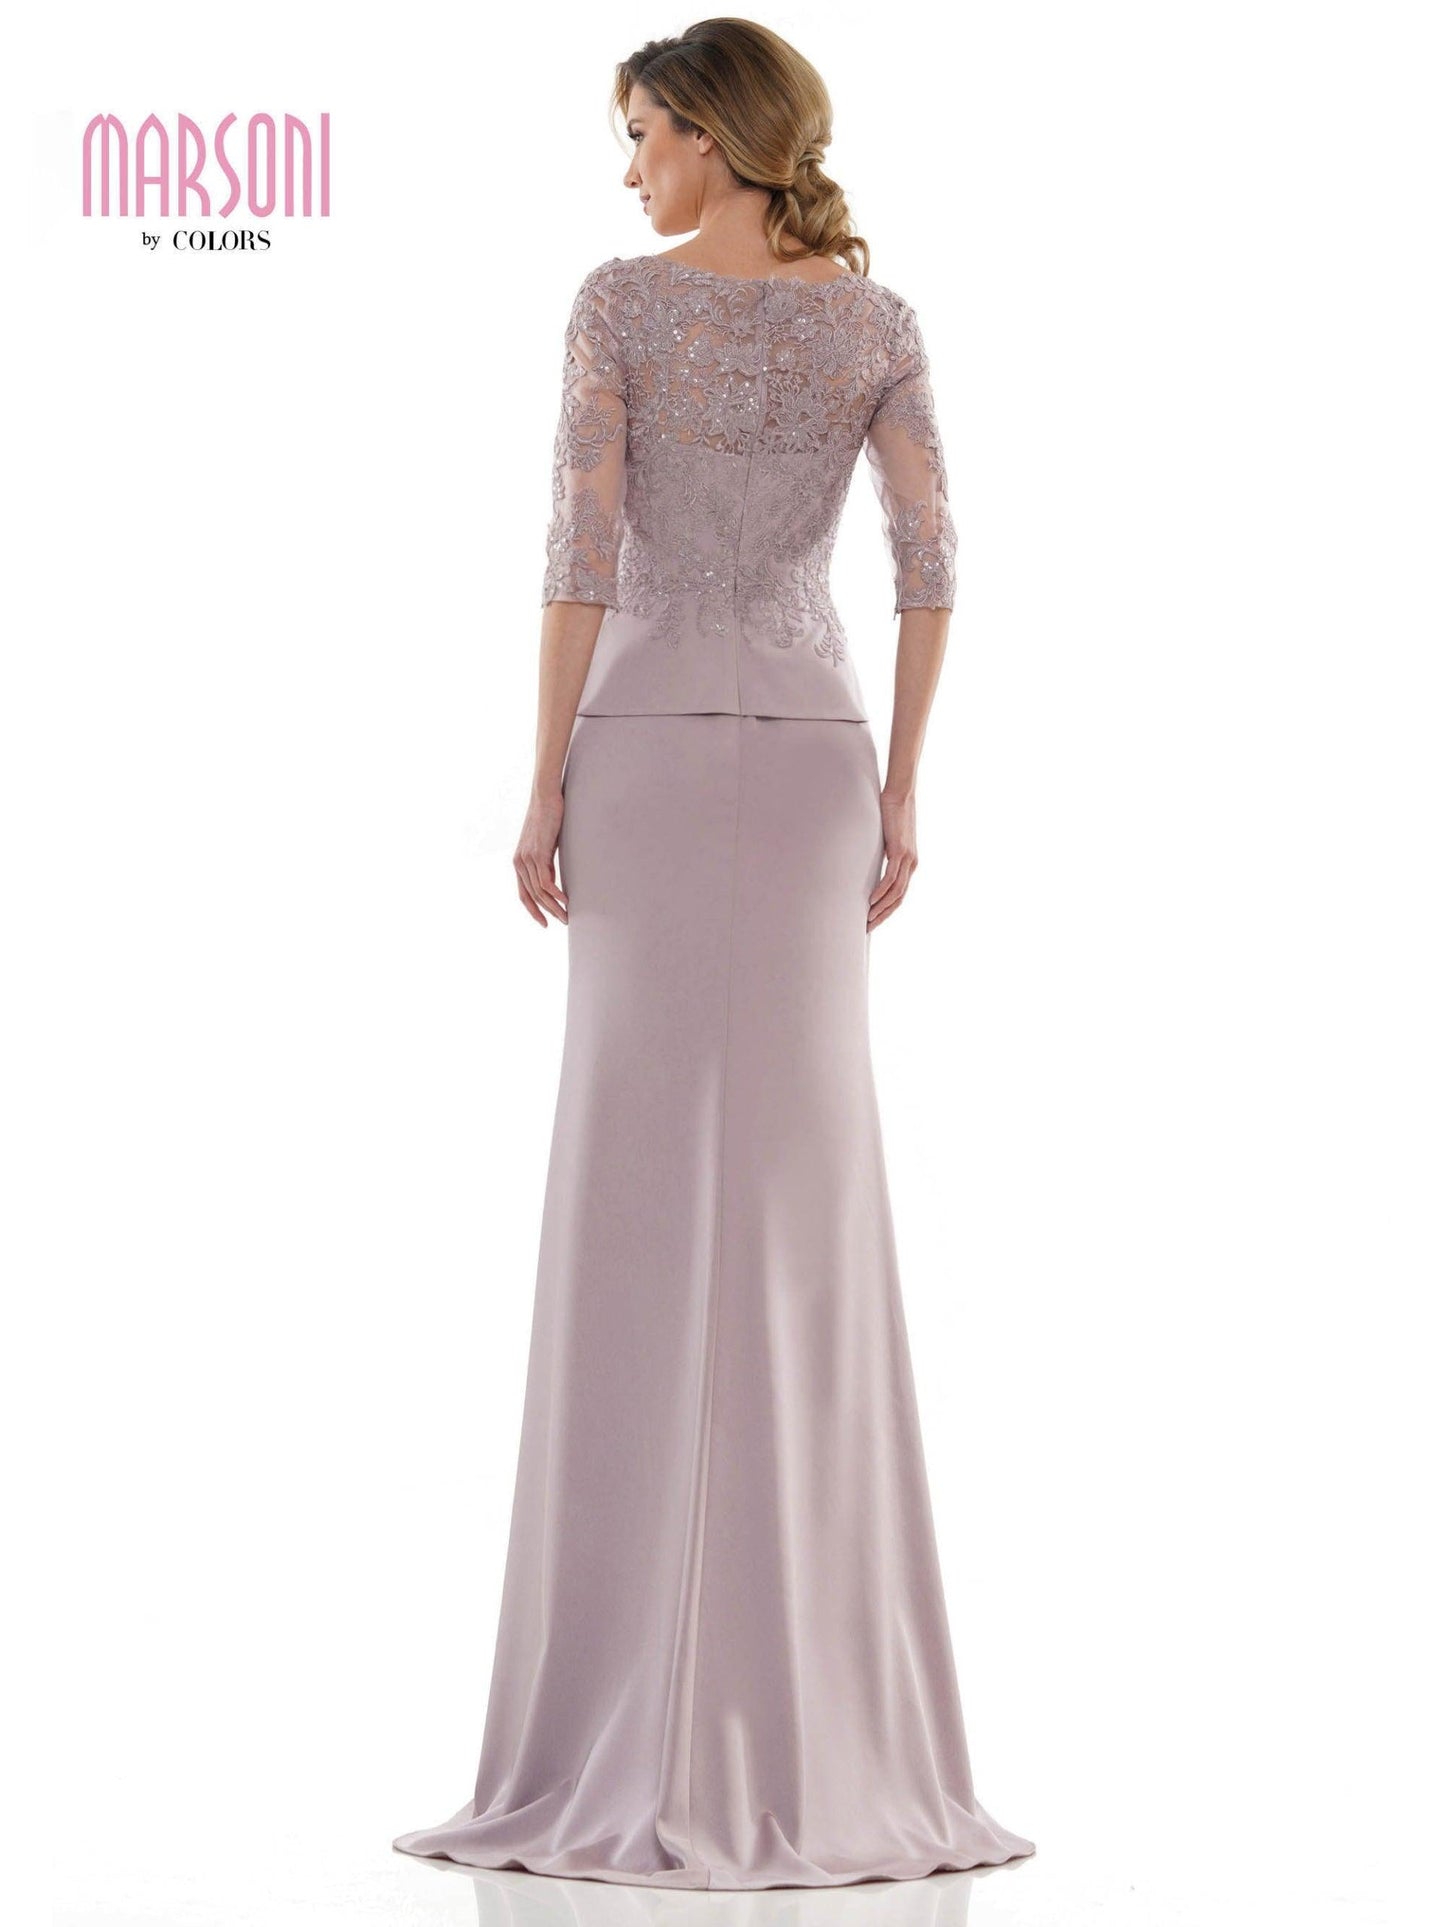 Marsoni Peplum Mother of the Bride Long Gown 1124 - The Dress Outlet